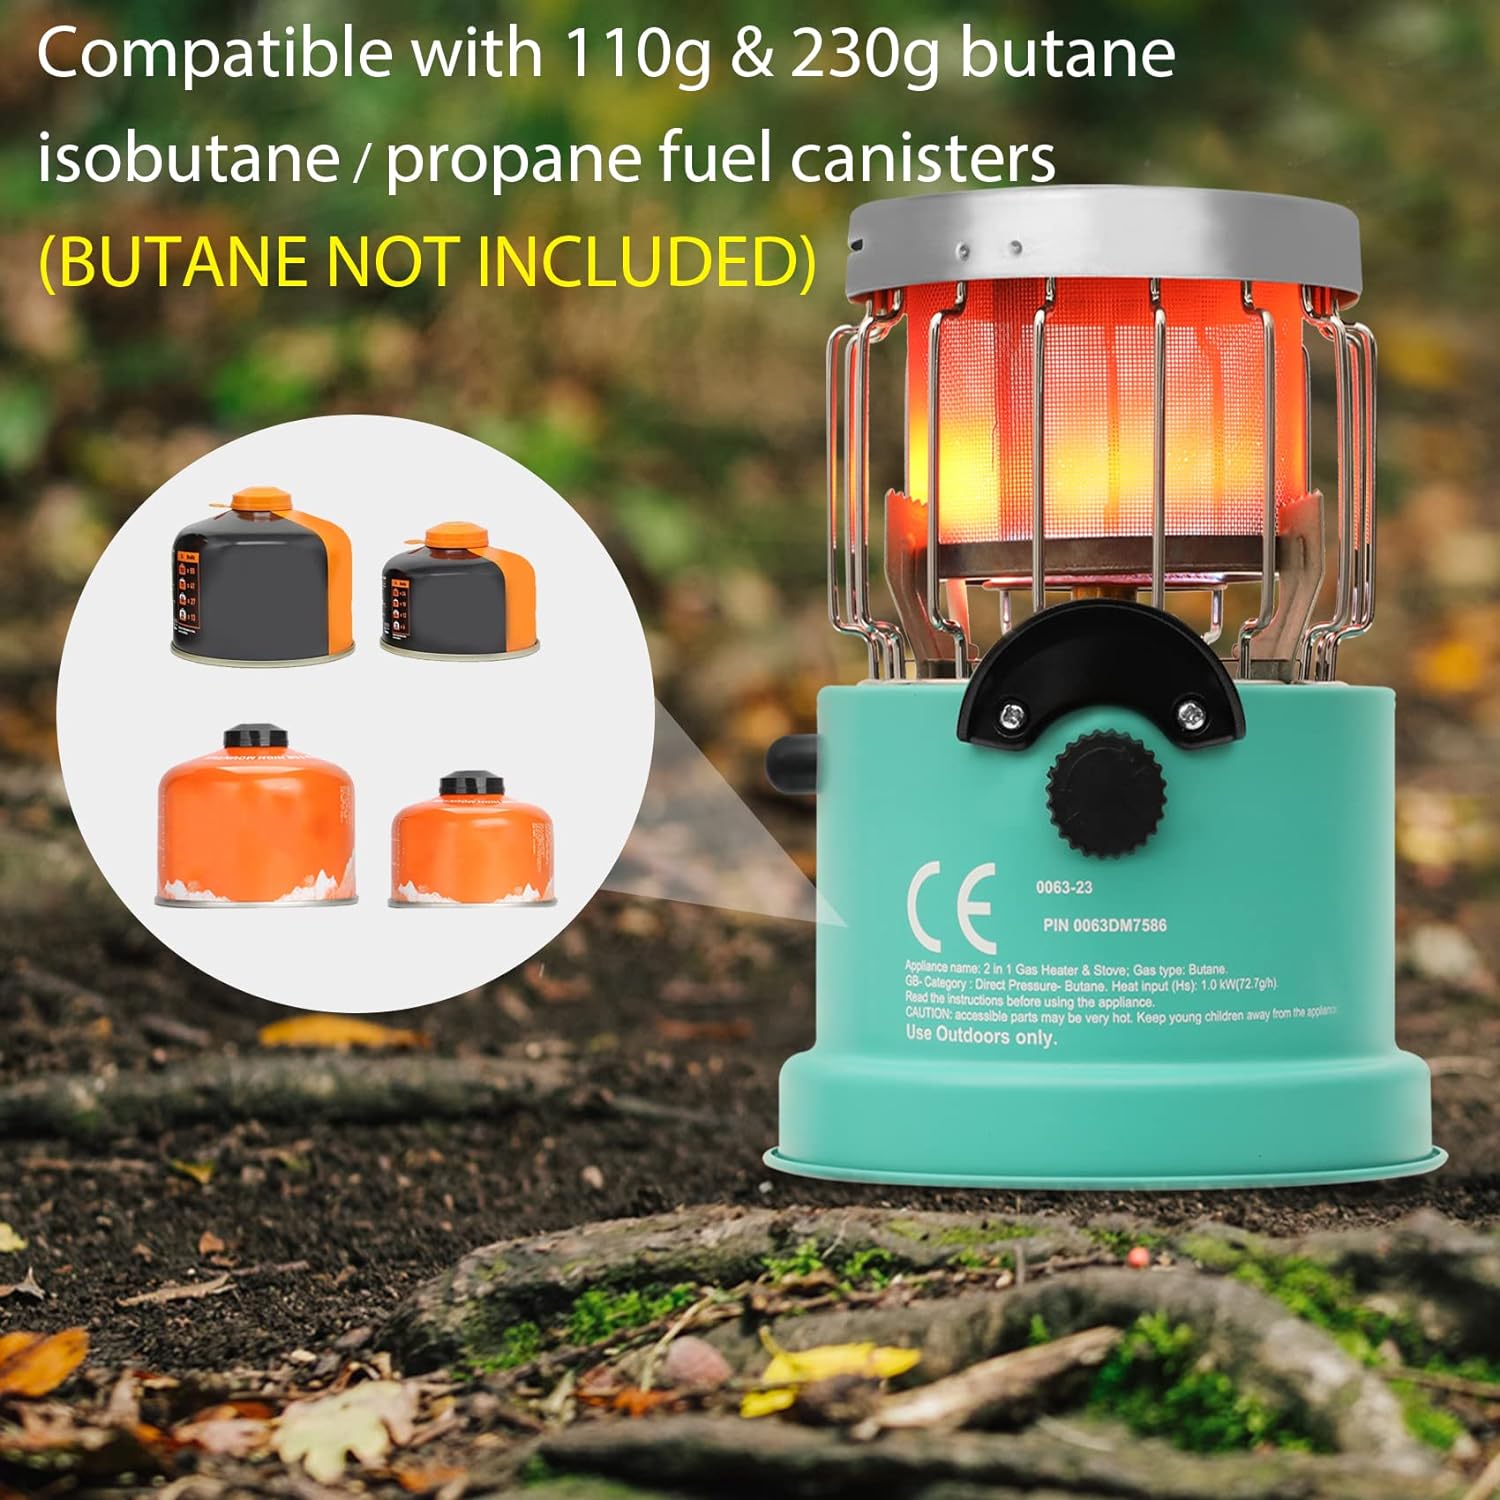 2 In 1 Camping Outdoor Propane Heater  Stove,Portable Propane Stove,Outdoor Camping Gas Stove,with ignition, For Outdoor Camping, Ice Fishing, Picnic, Hunting, Hiking, Barbecue, Backpacking - 2 In 1 Camping Heater & Stove Review